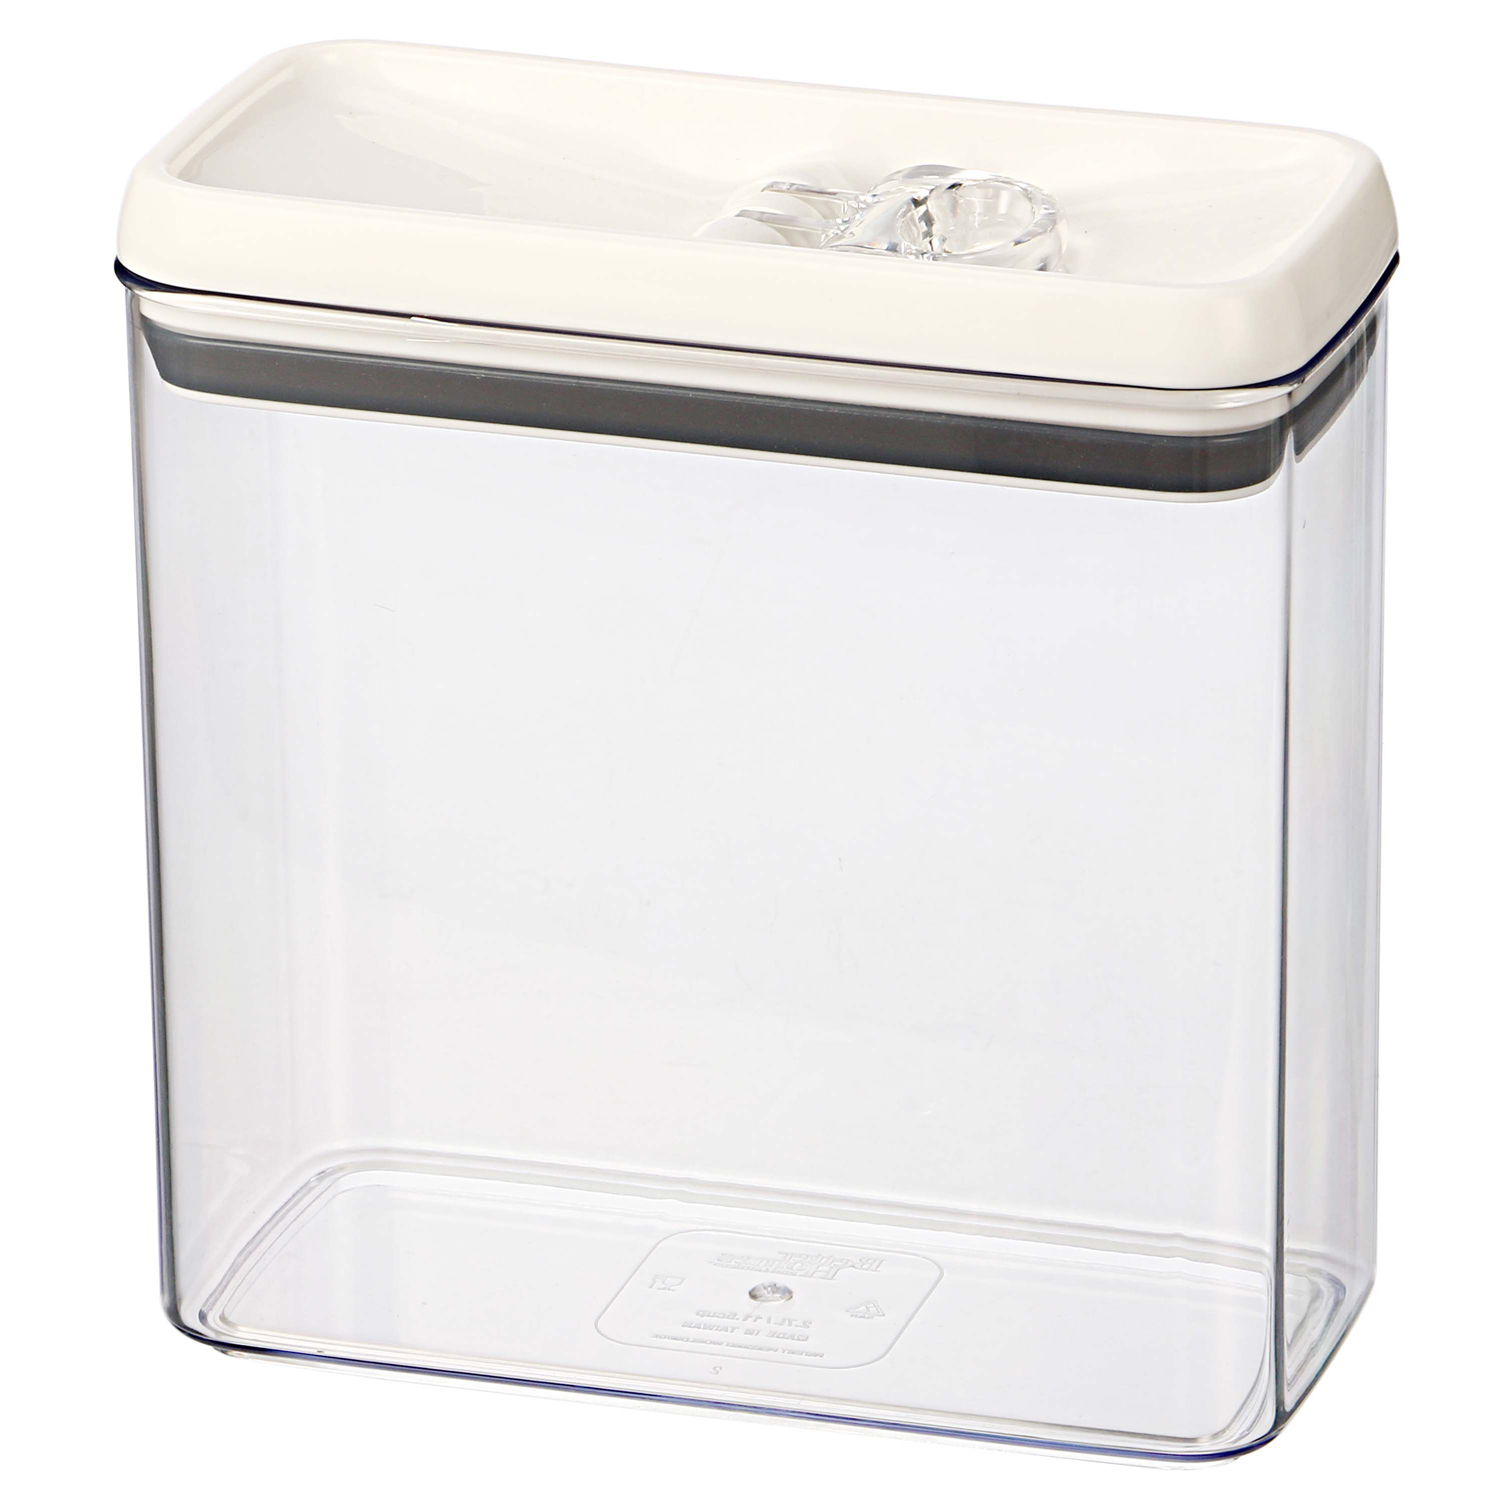 Better Homes & Gardens Canister - 11.5 Cup Flip-Tite Rectangular Food Storage Container - image 1 of 5